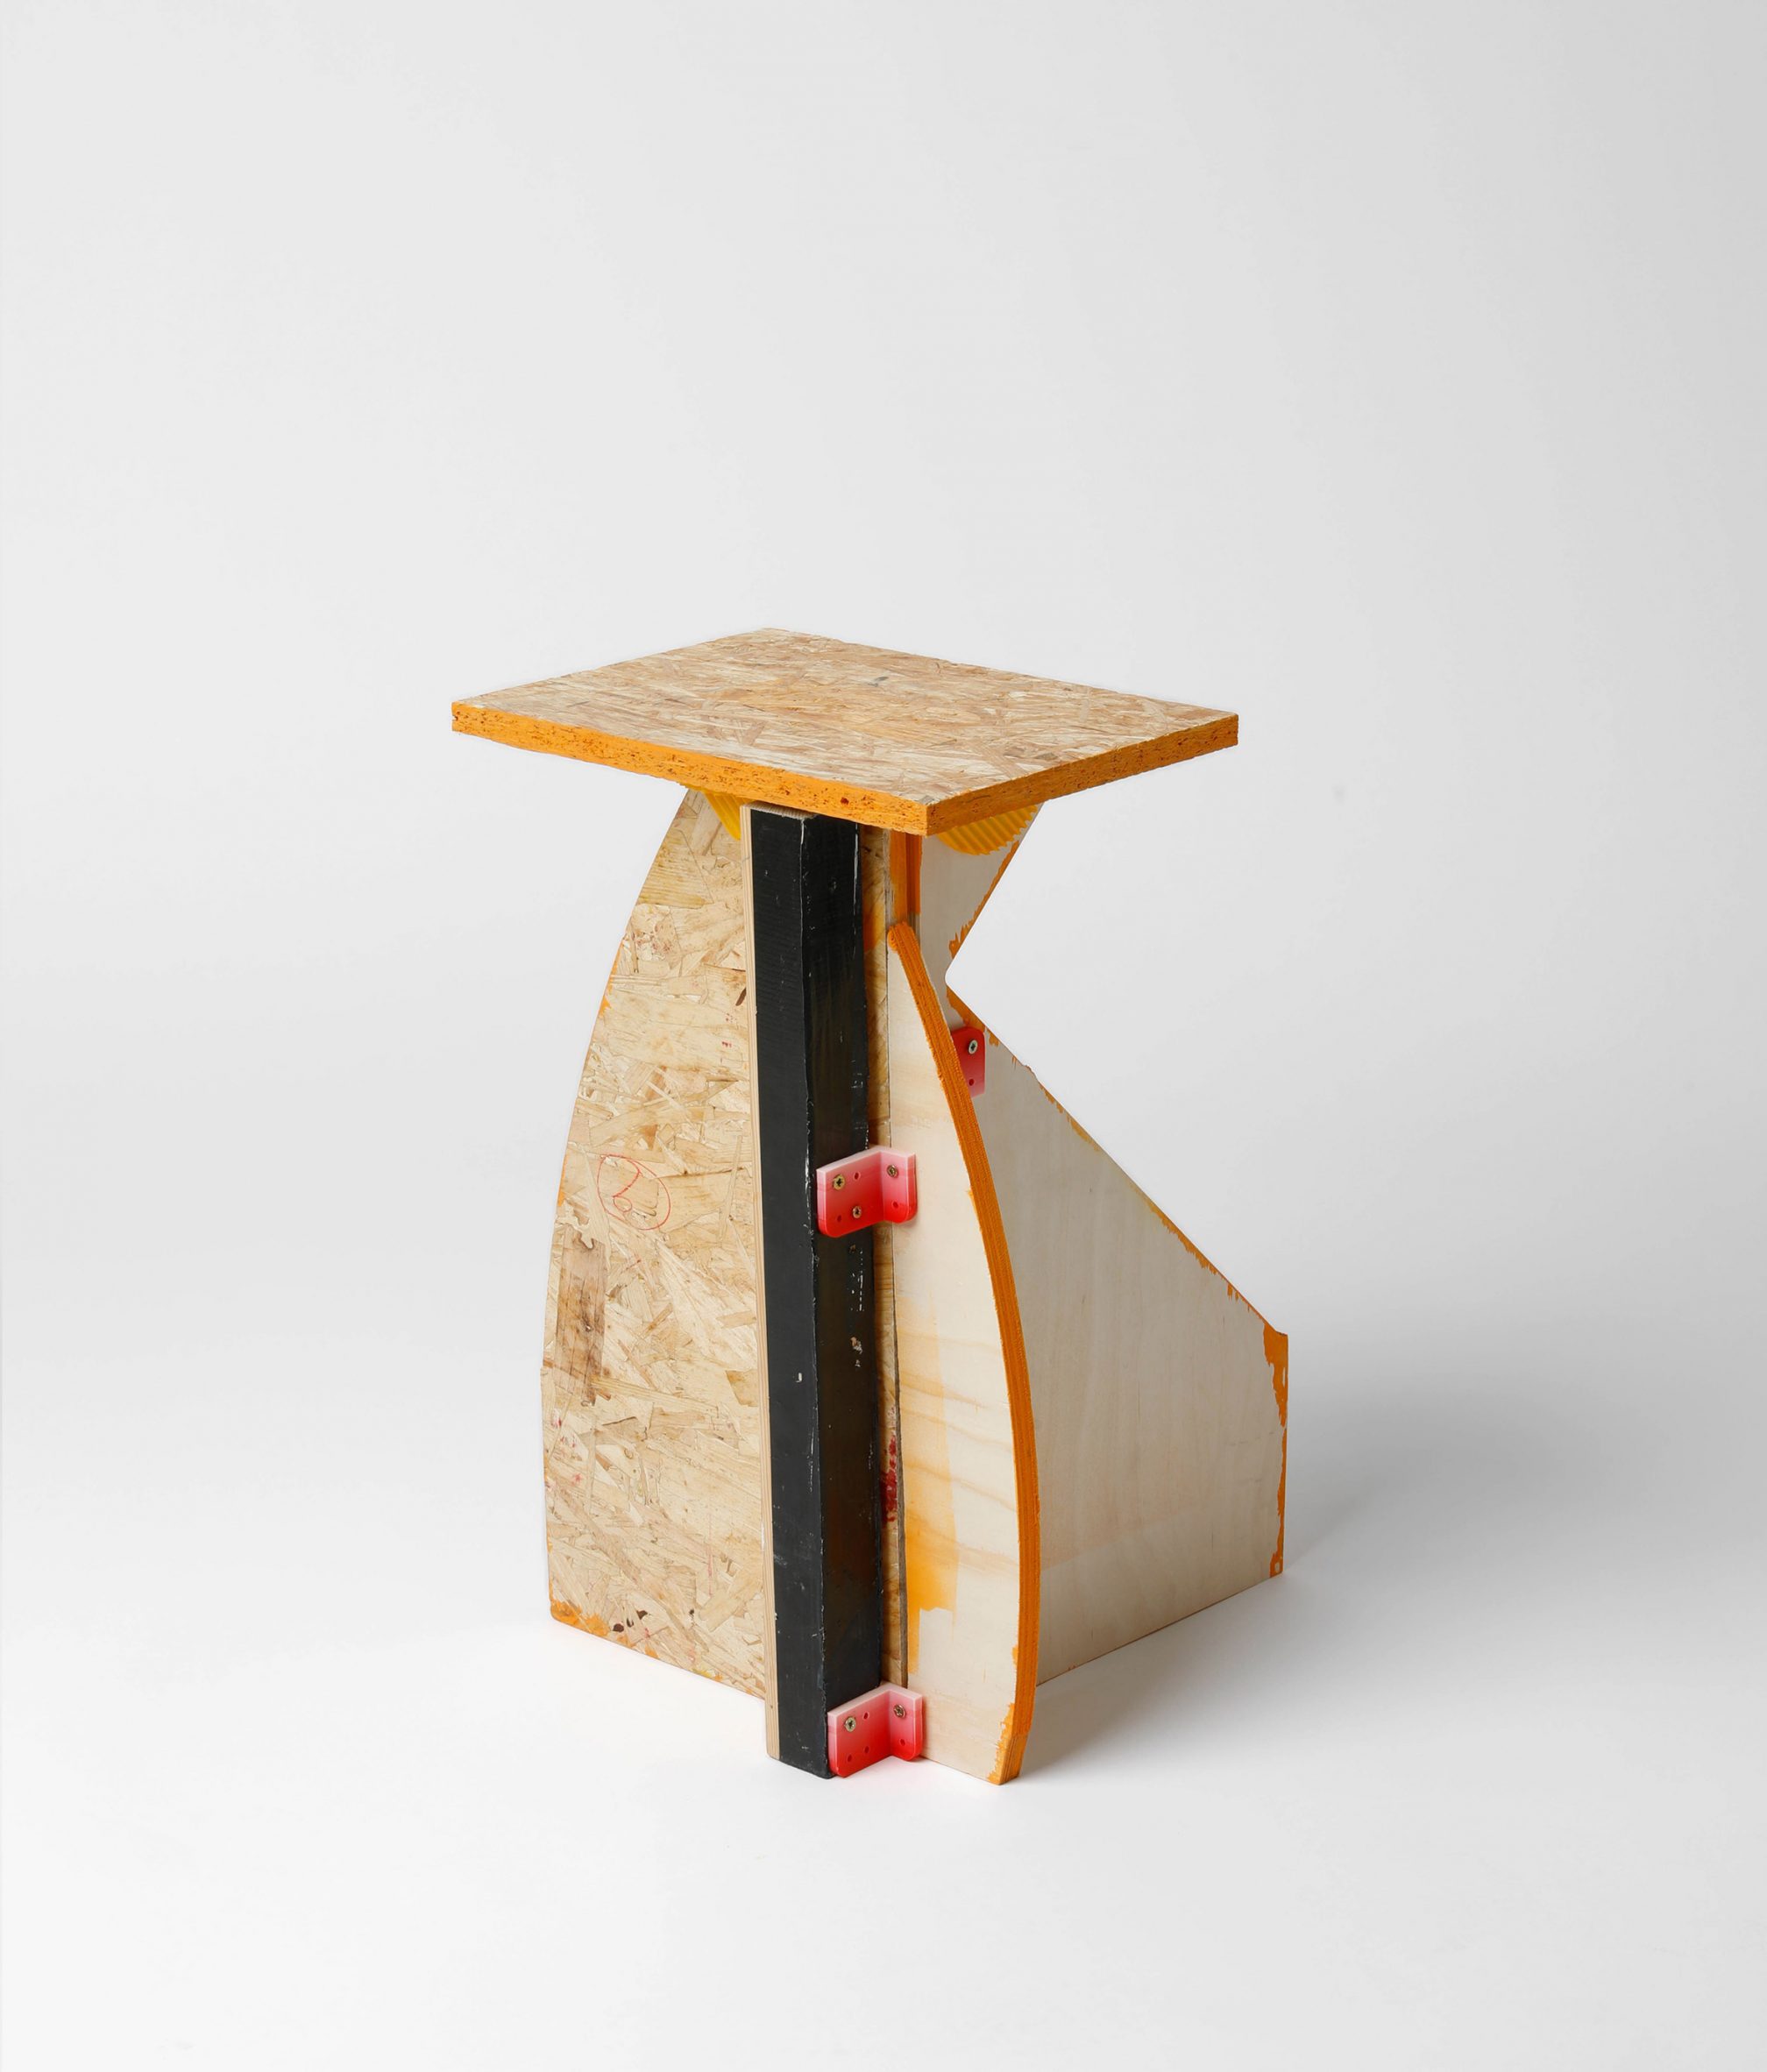 Table made from scrap materials using Furniture First Aid Kit by Yalan Dan